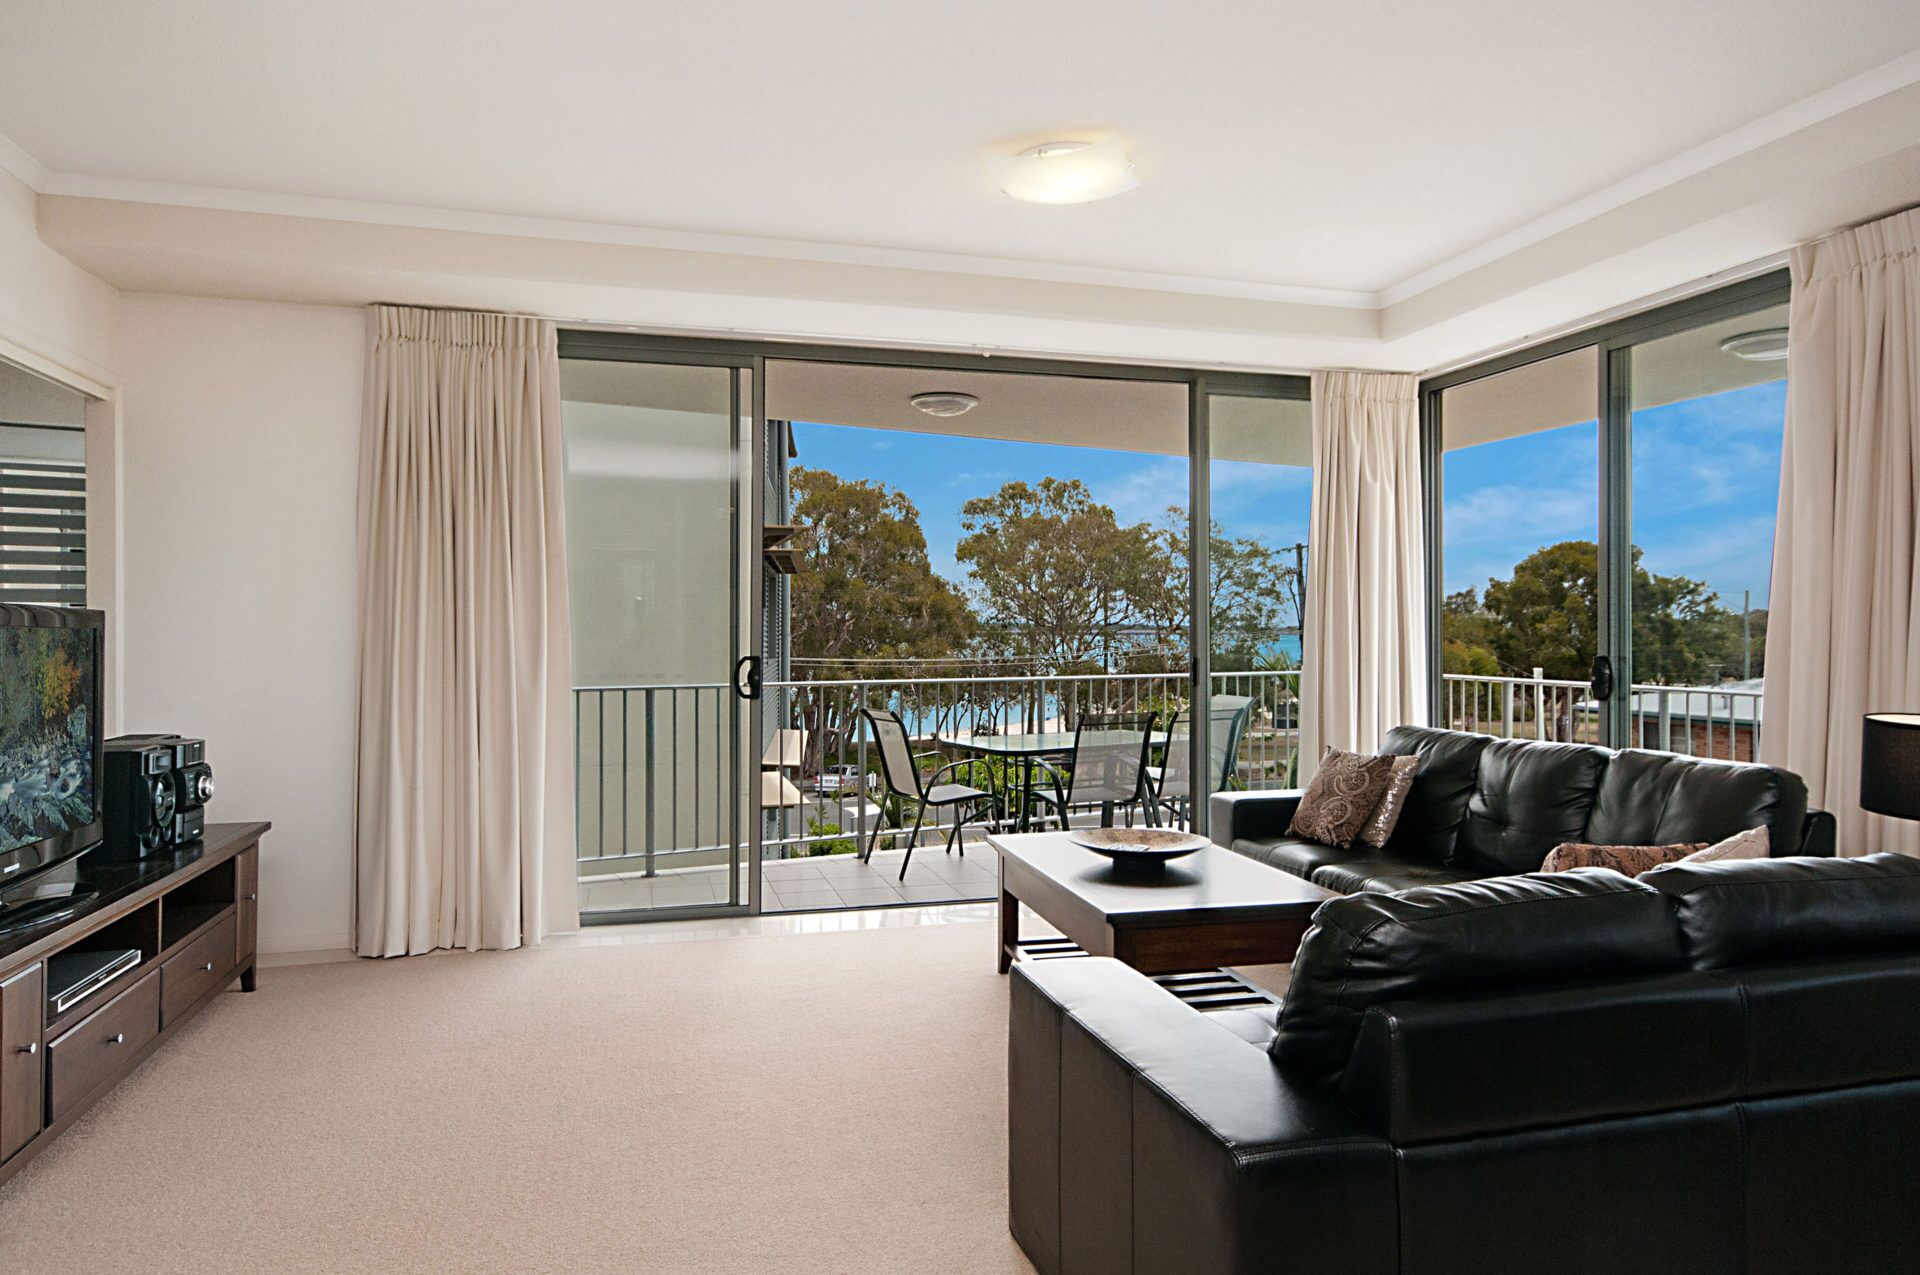 Spectacular Unit Overlooking Pumicestone Passage - Welsby Pde, Bongaree